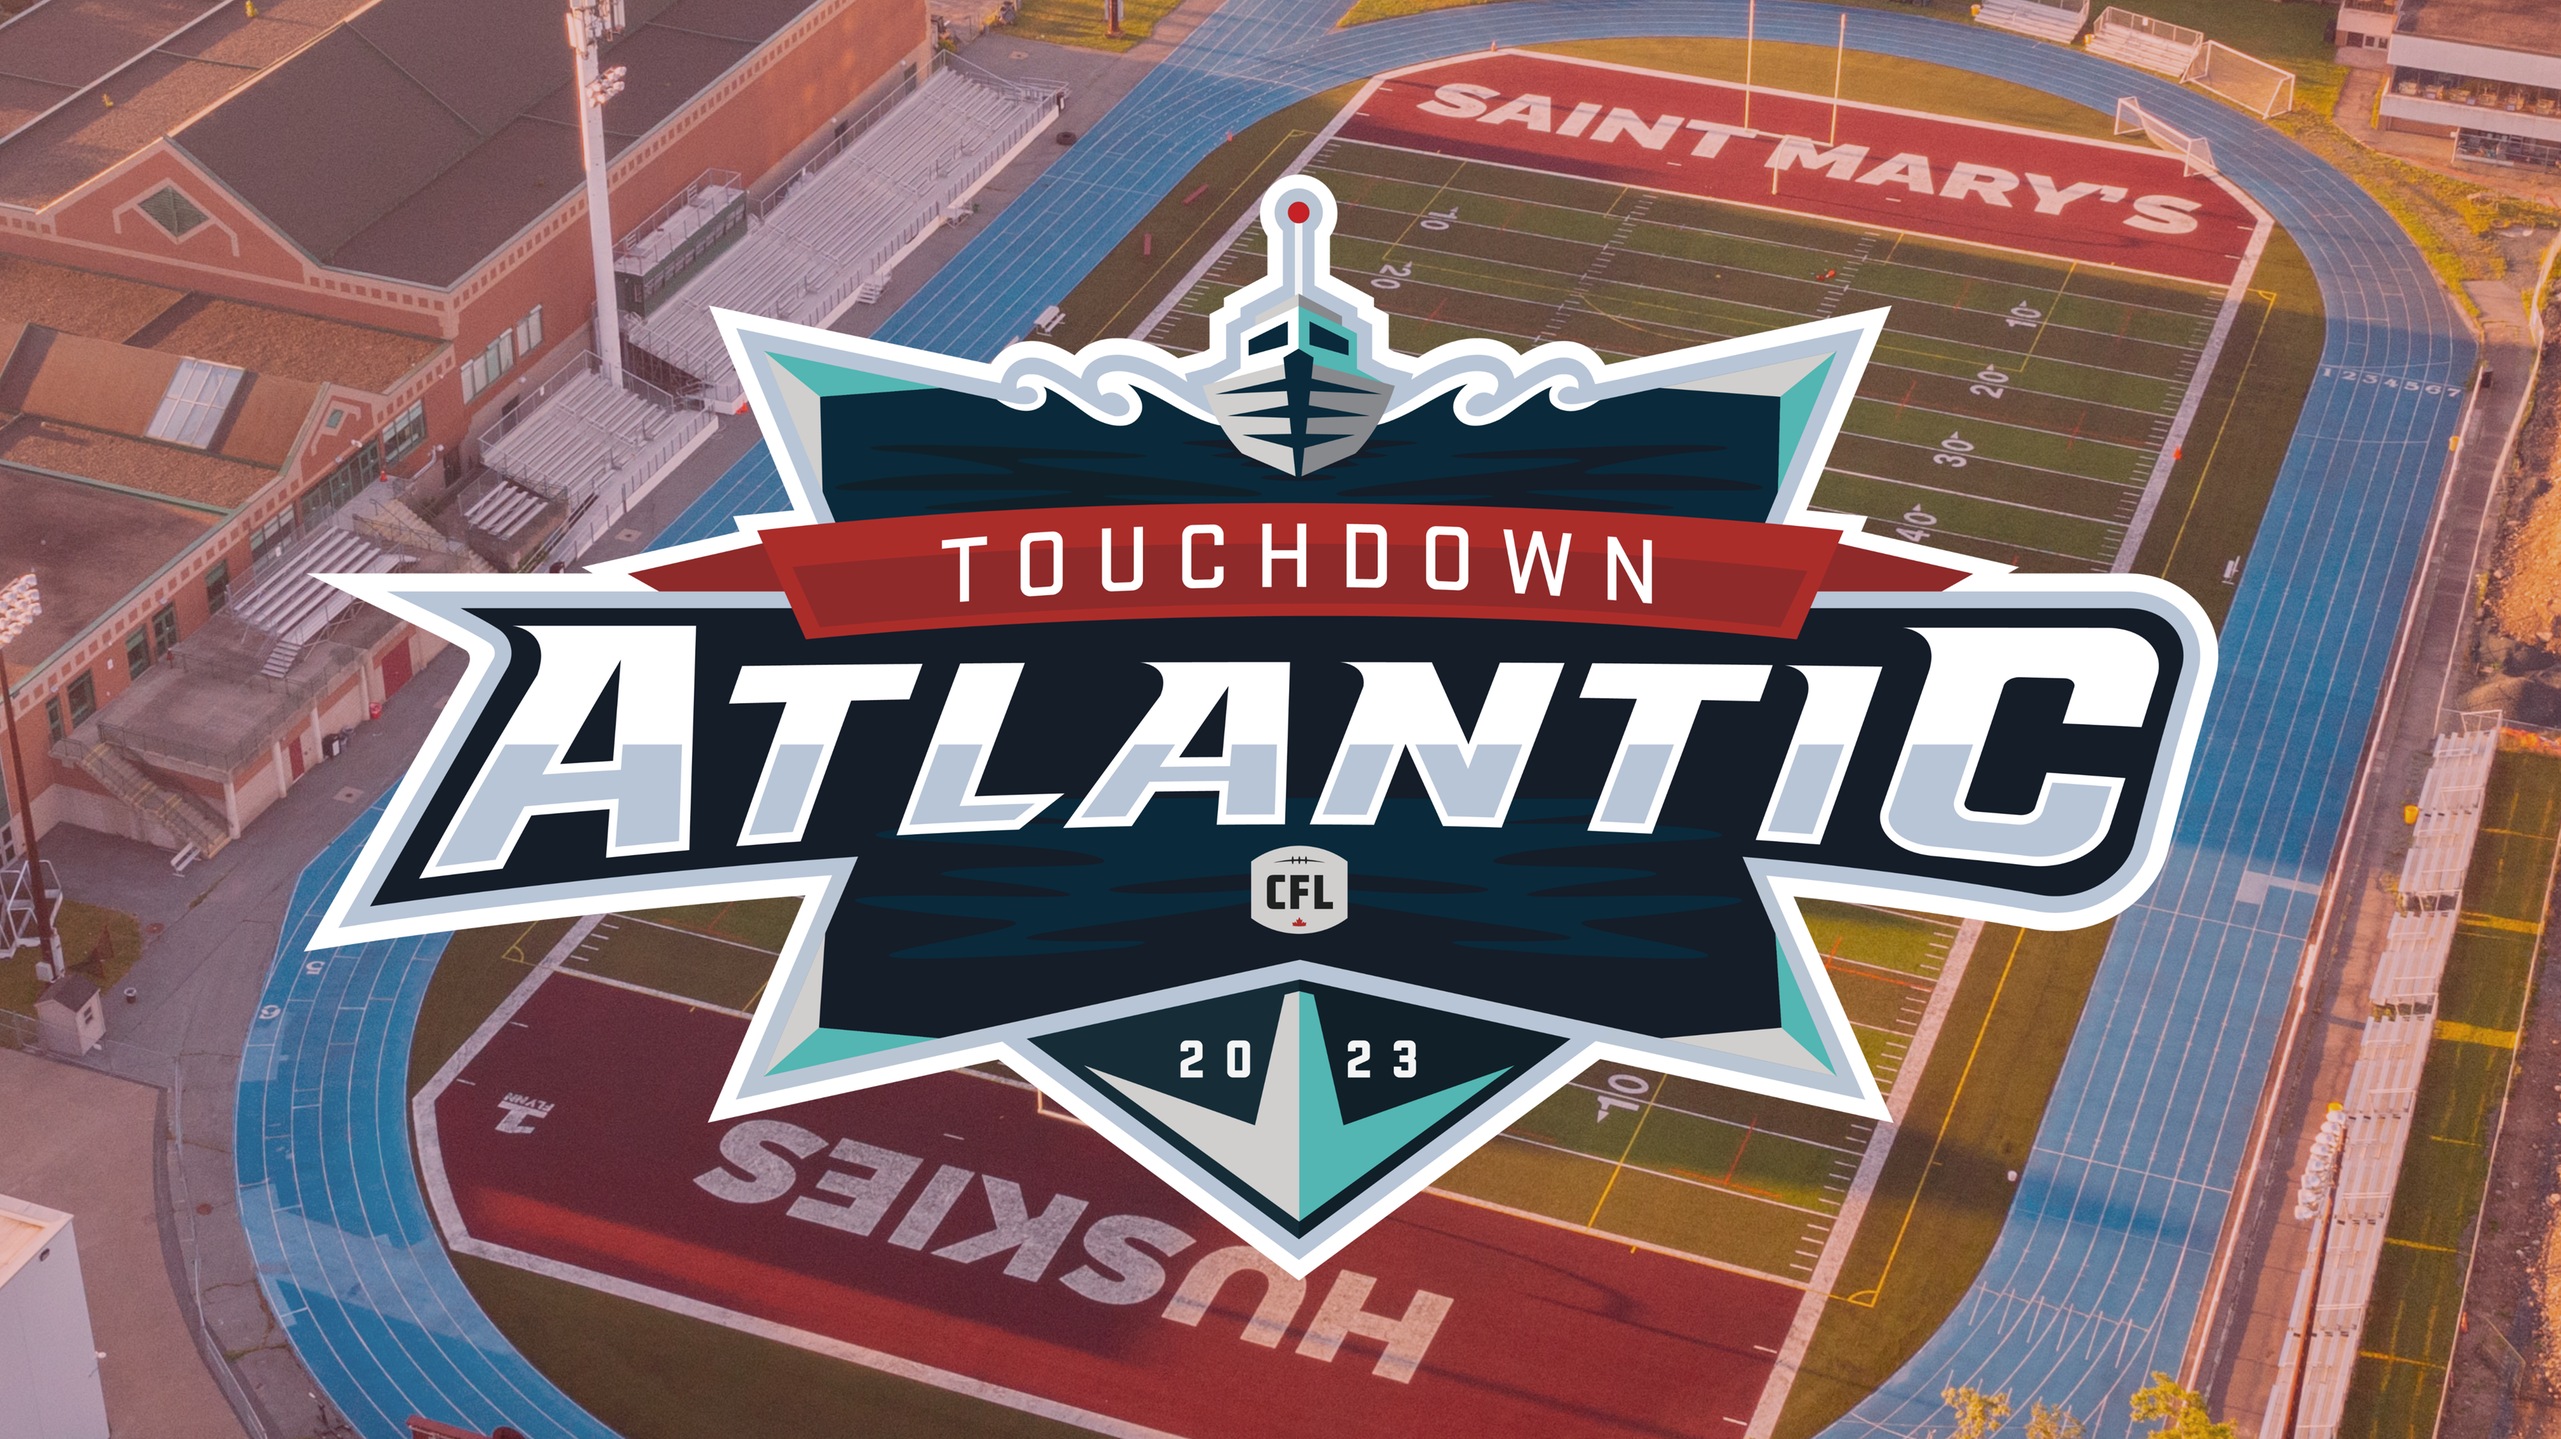 Touchdown Atlantic tickets now on sale!